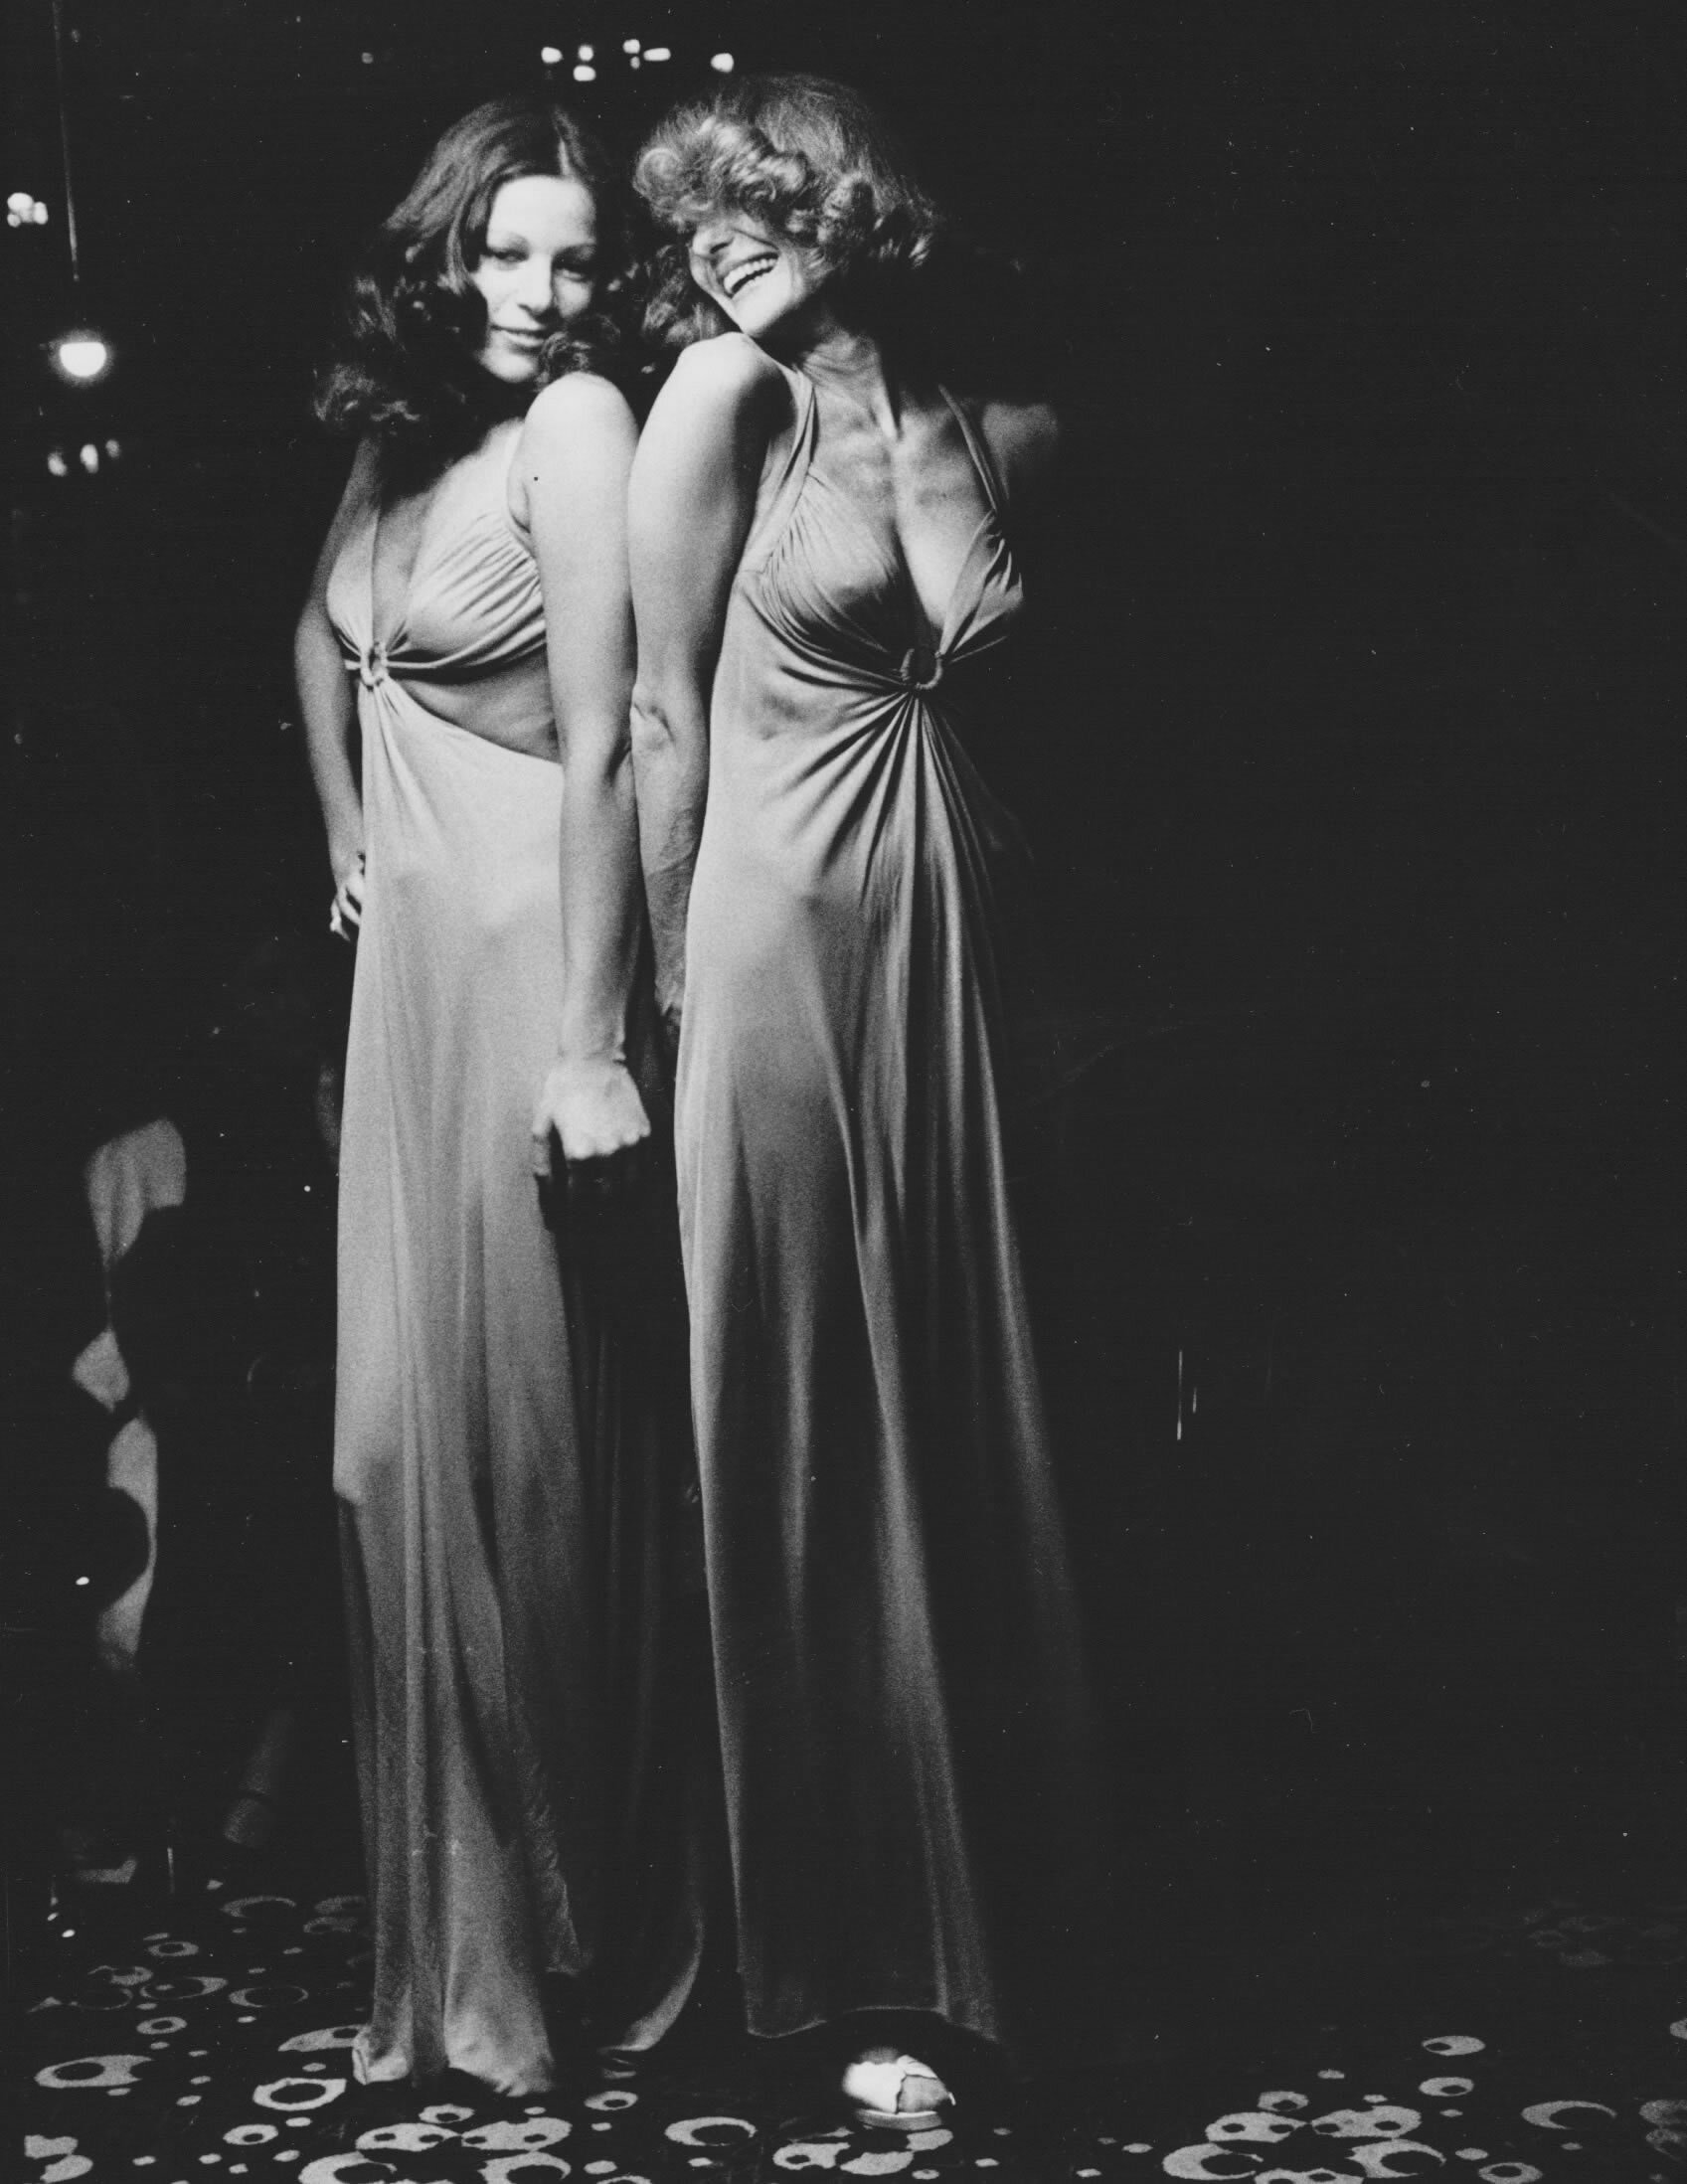 In 1971 Mia left fashion, and Vicky rebranded "Mia-Vicky" as "Vicky Tiel." This "bra-dress" was part of the premier collection under that label.